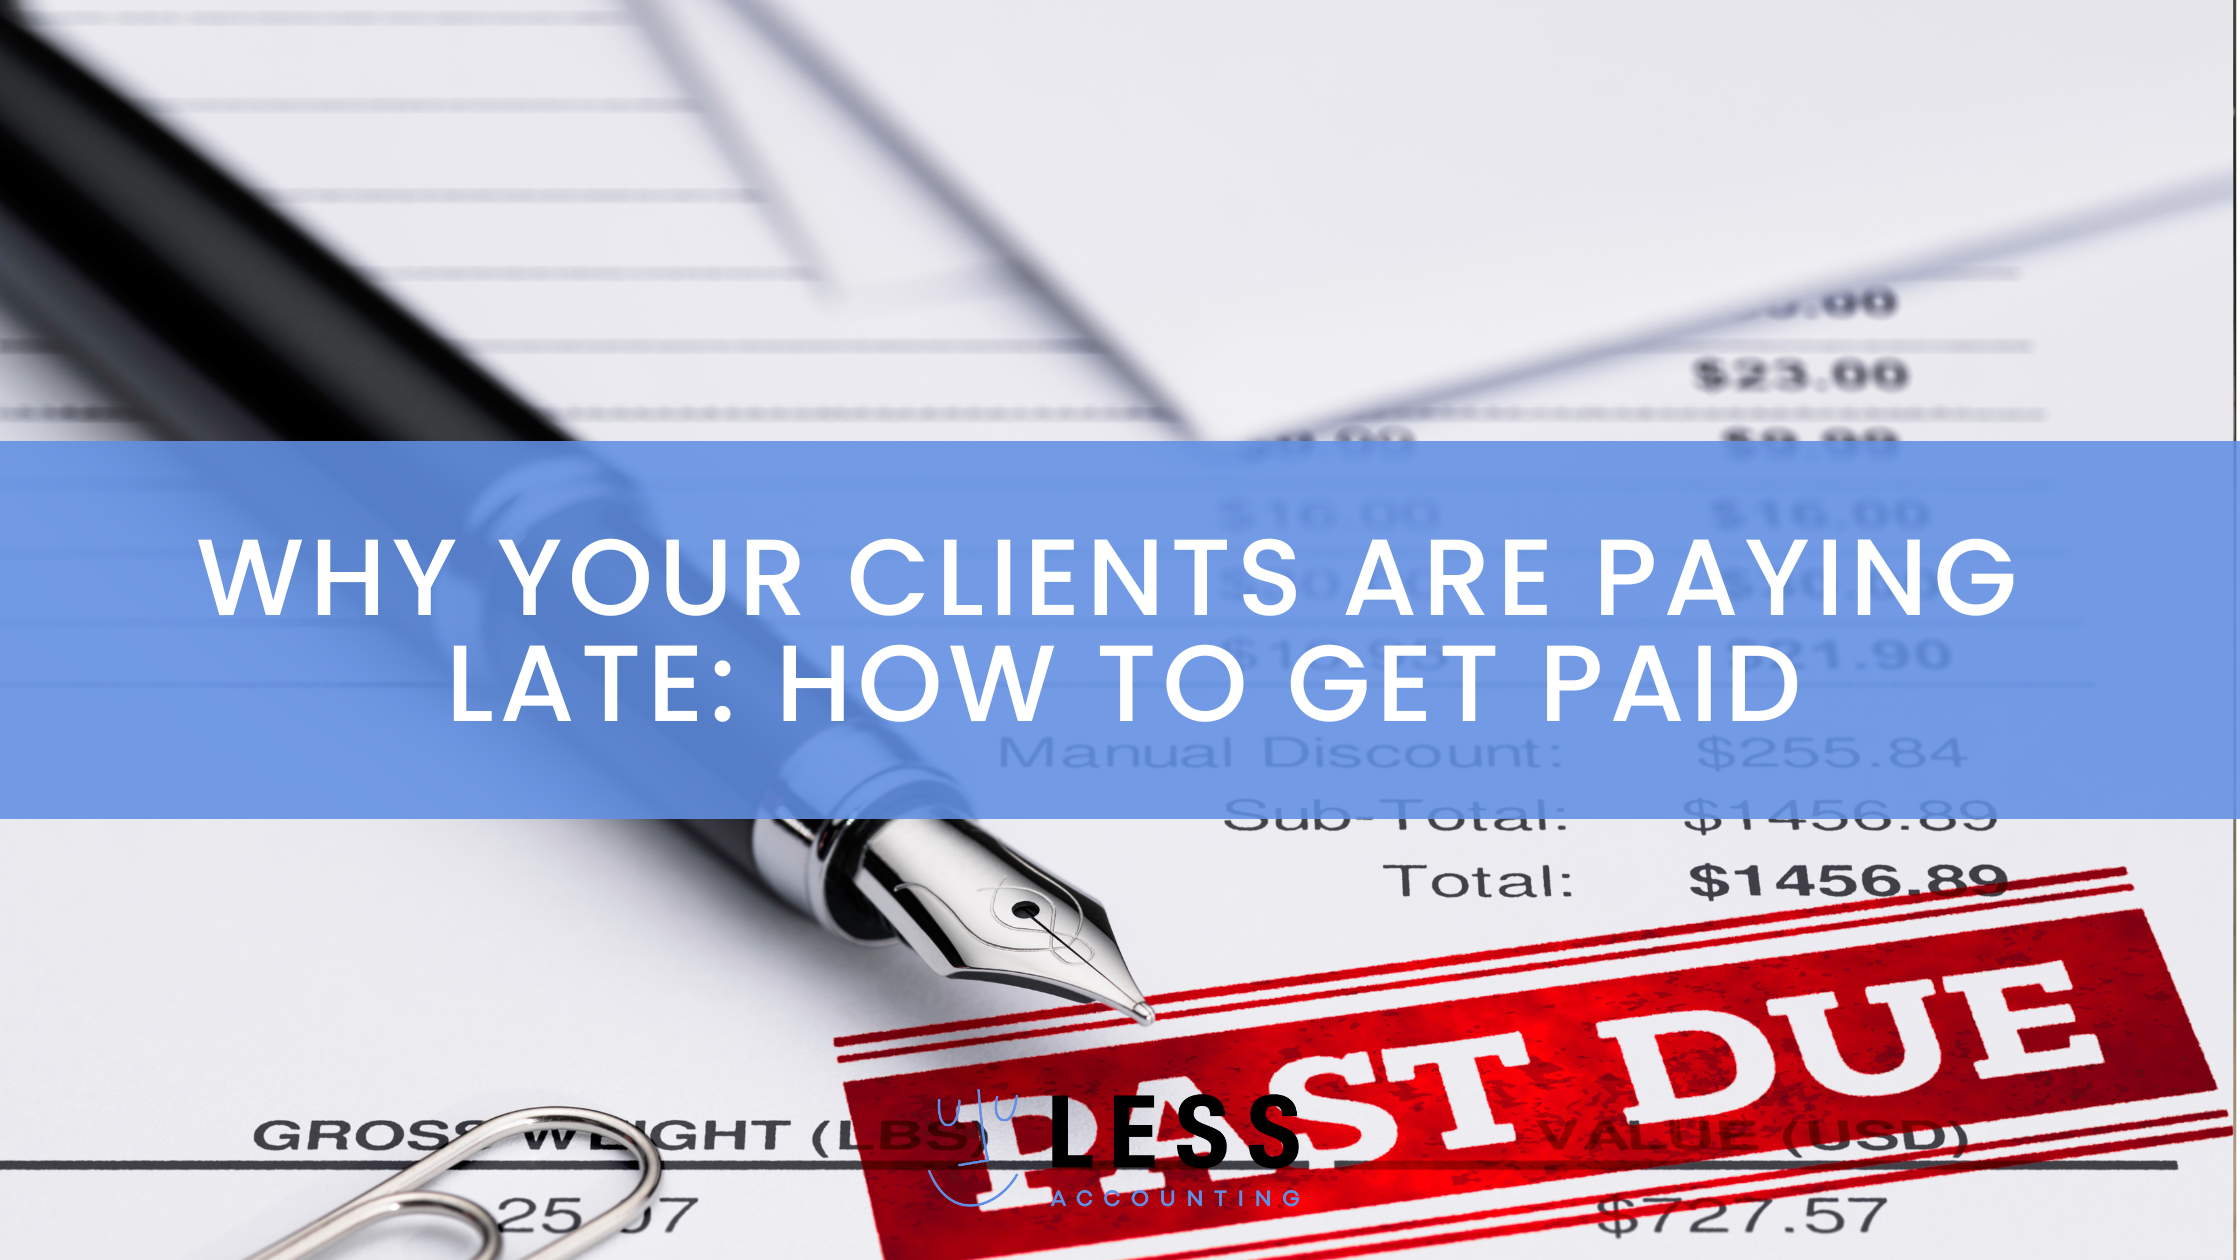 Why you clients are paying late and how to get paid